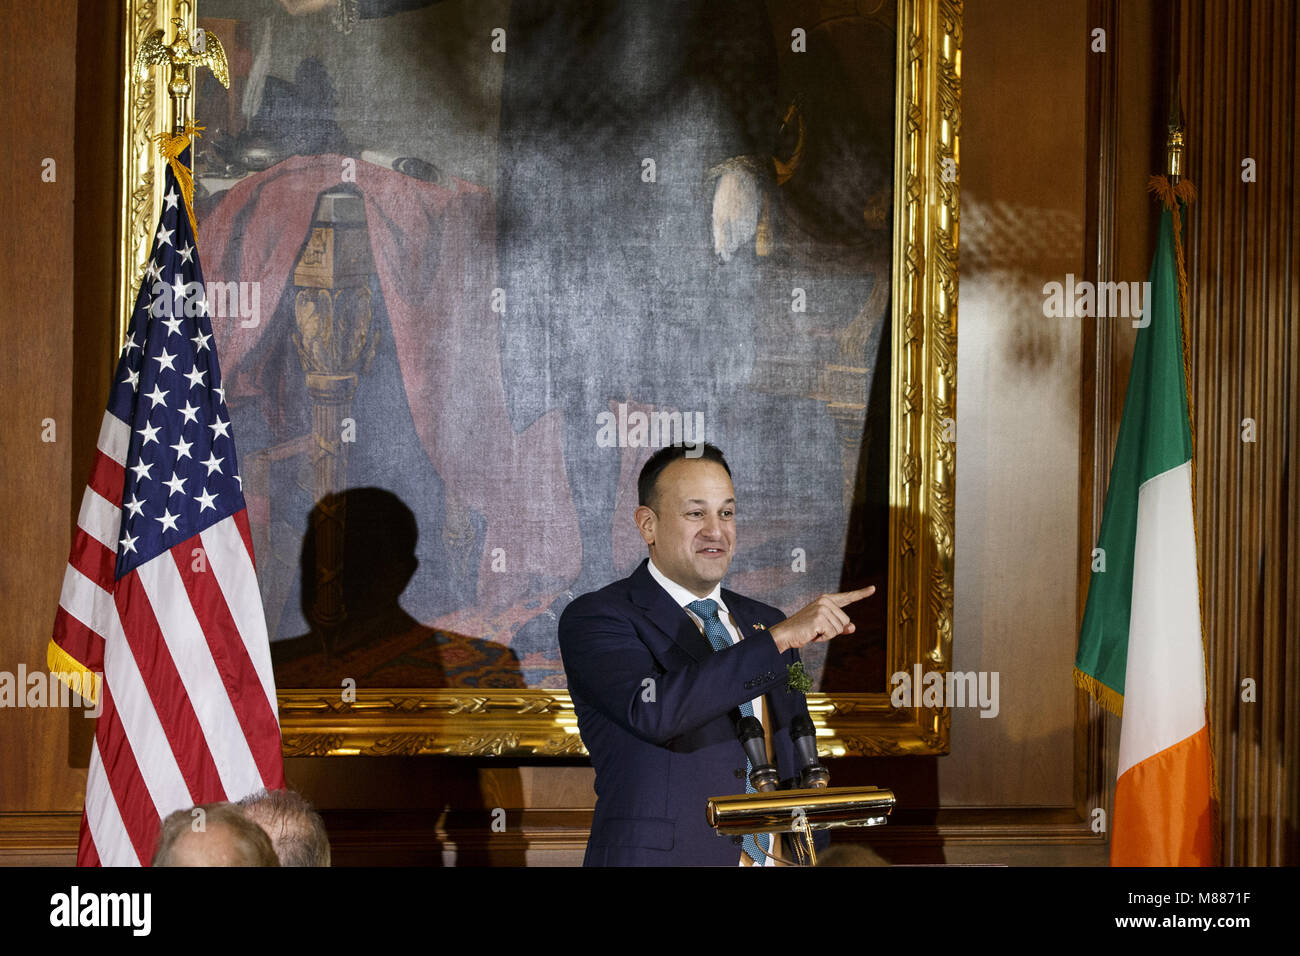 Washington, District of Columbia, USA. 15th Mar, 2018. Prime Minister of Ireland Leo Varadkar speaks at the Friends of Ireland luncheon hosted by United States Speaker of the House of Representatives Paul Ryan, Republican of Wisconsin, at the United States Capitol in Washington, DC on March 15, 2018. Credit: Alex Edelman/CNP Credit: Alex Edelman/CNP/ZUMA Wire/Alamy Live News Stock Photo